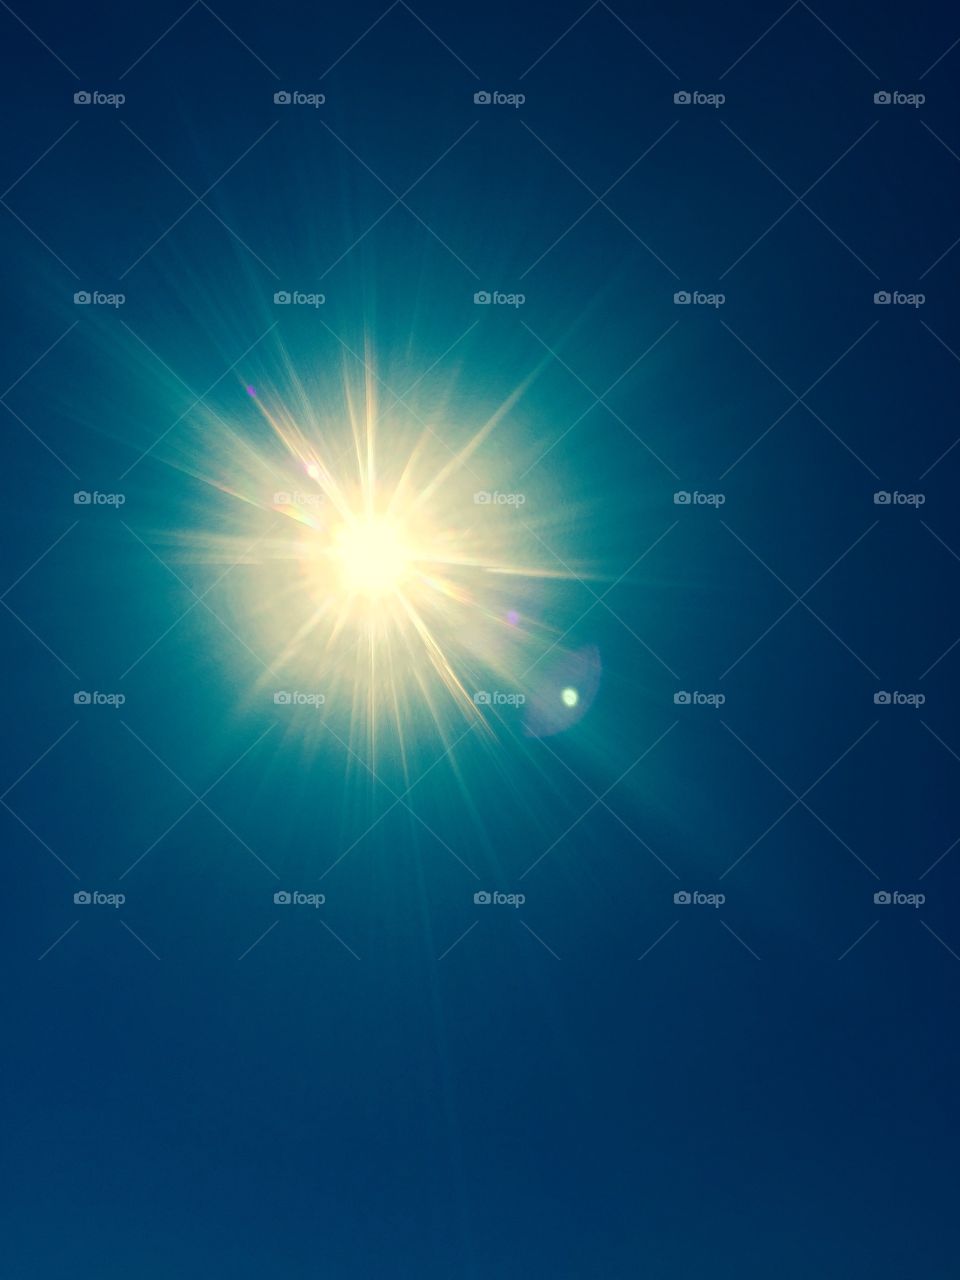 Sun, Flare, Insubstantial, Glare, Abstract